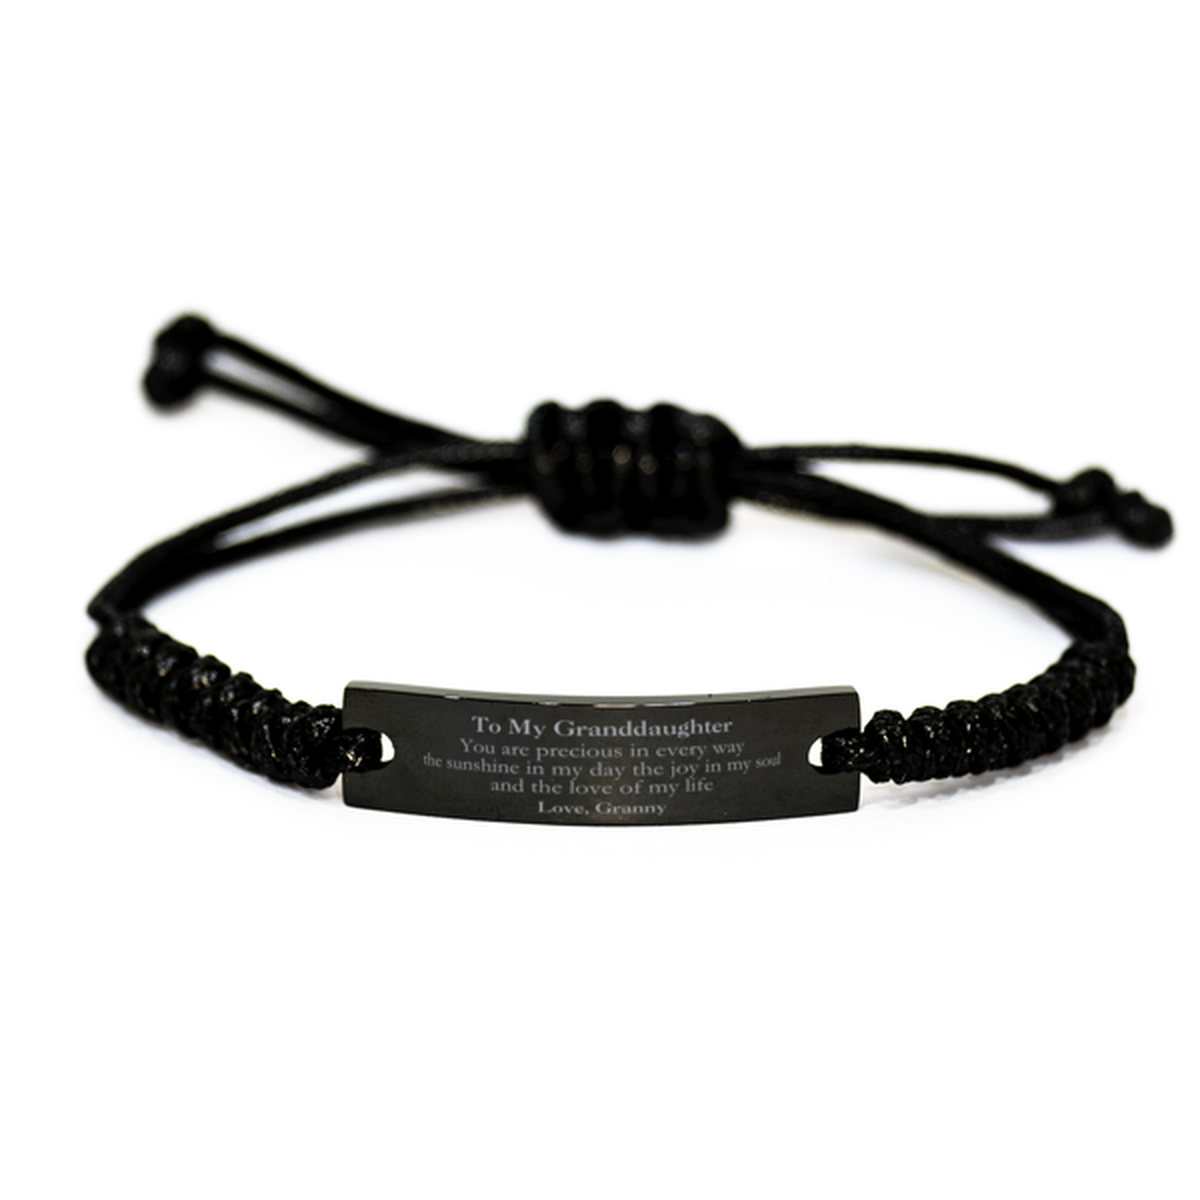 Graduation Gifts for Granddaughter Black Rope Bracelet Present from Granny, Christmas Granddaughter Birthday Gifts Granddaughter You are precious in every way the sunshine in my day. Love, Granny